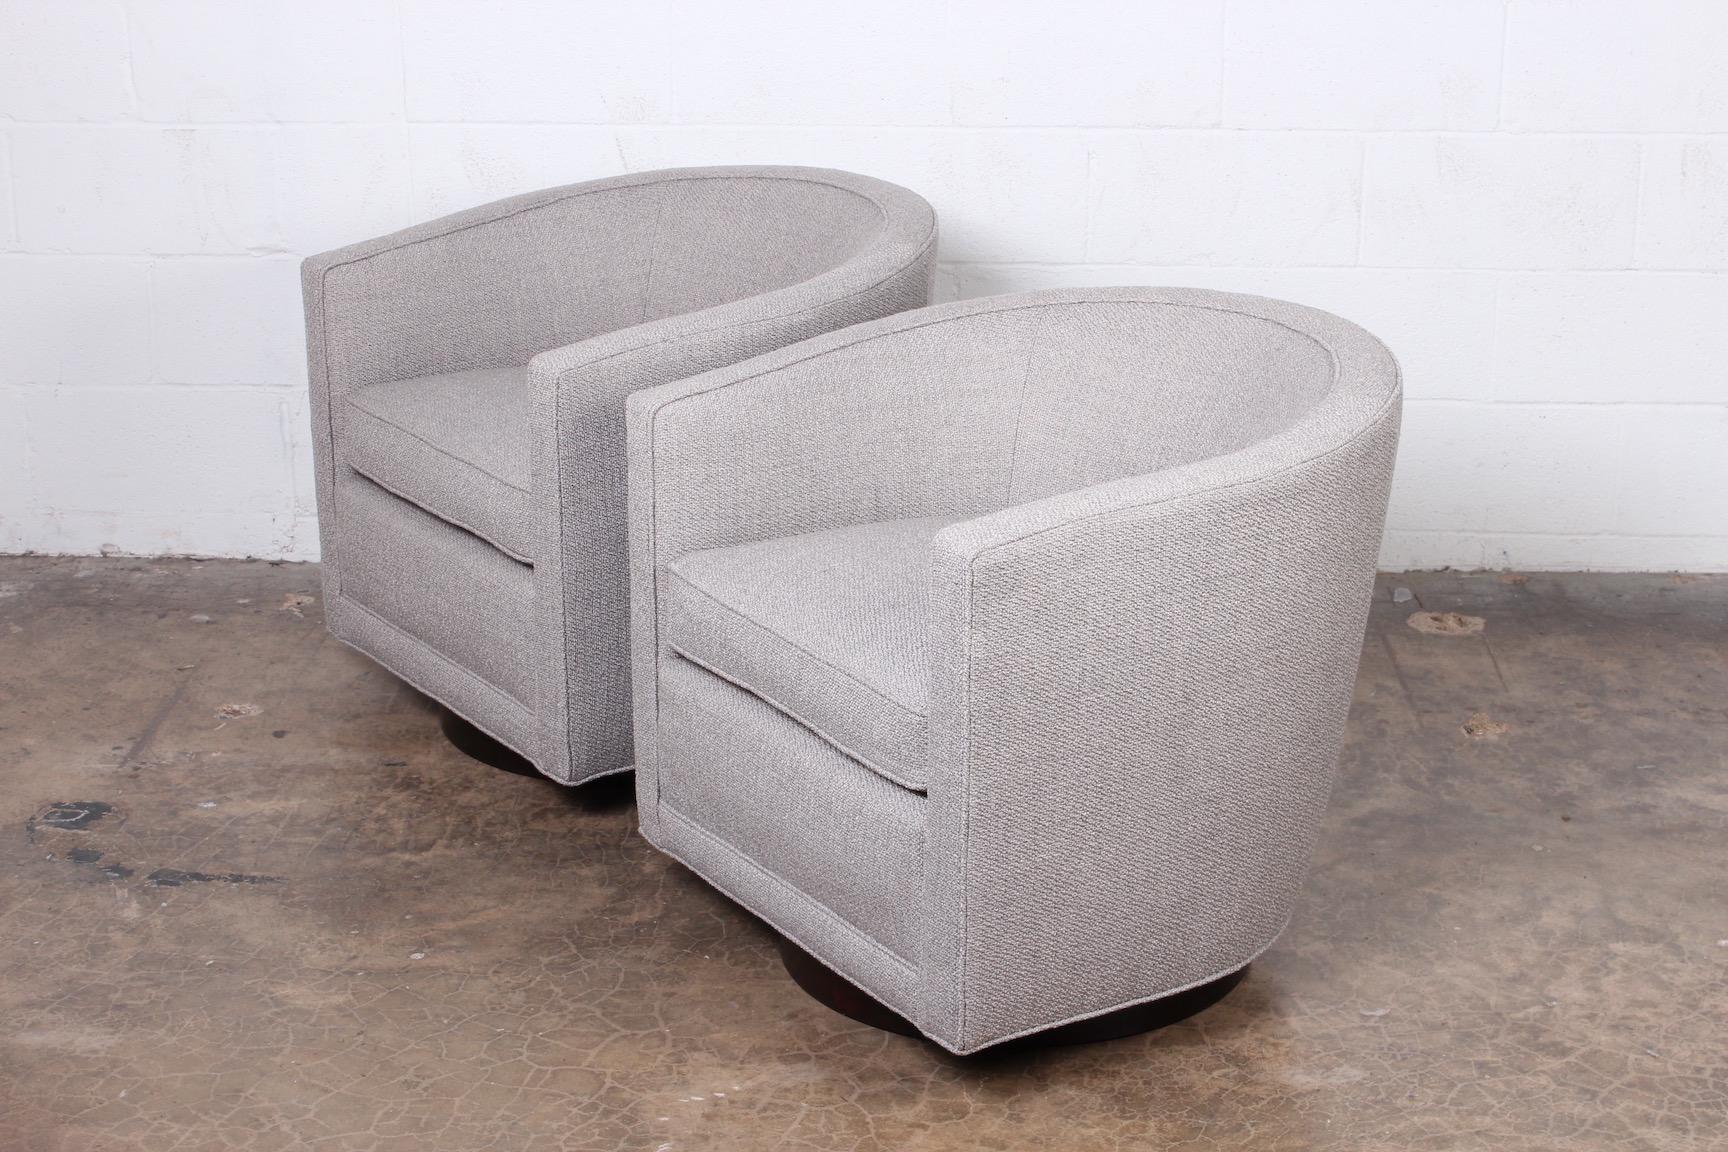 Pair of Swivel Chairs by Edward Wormley for Dunbar 4